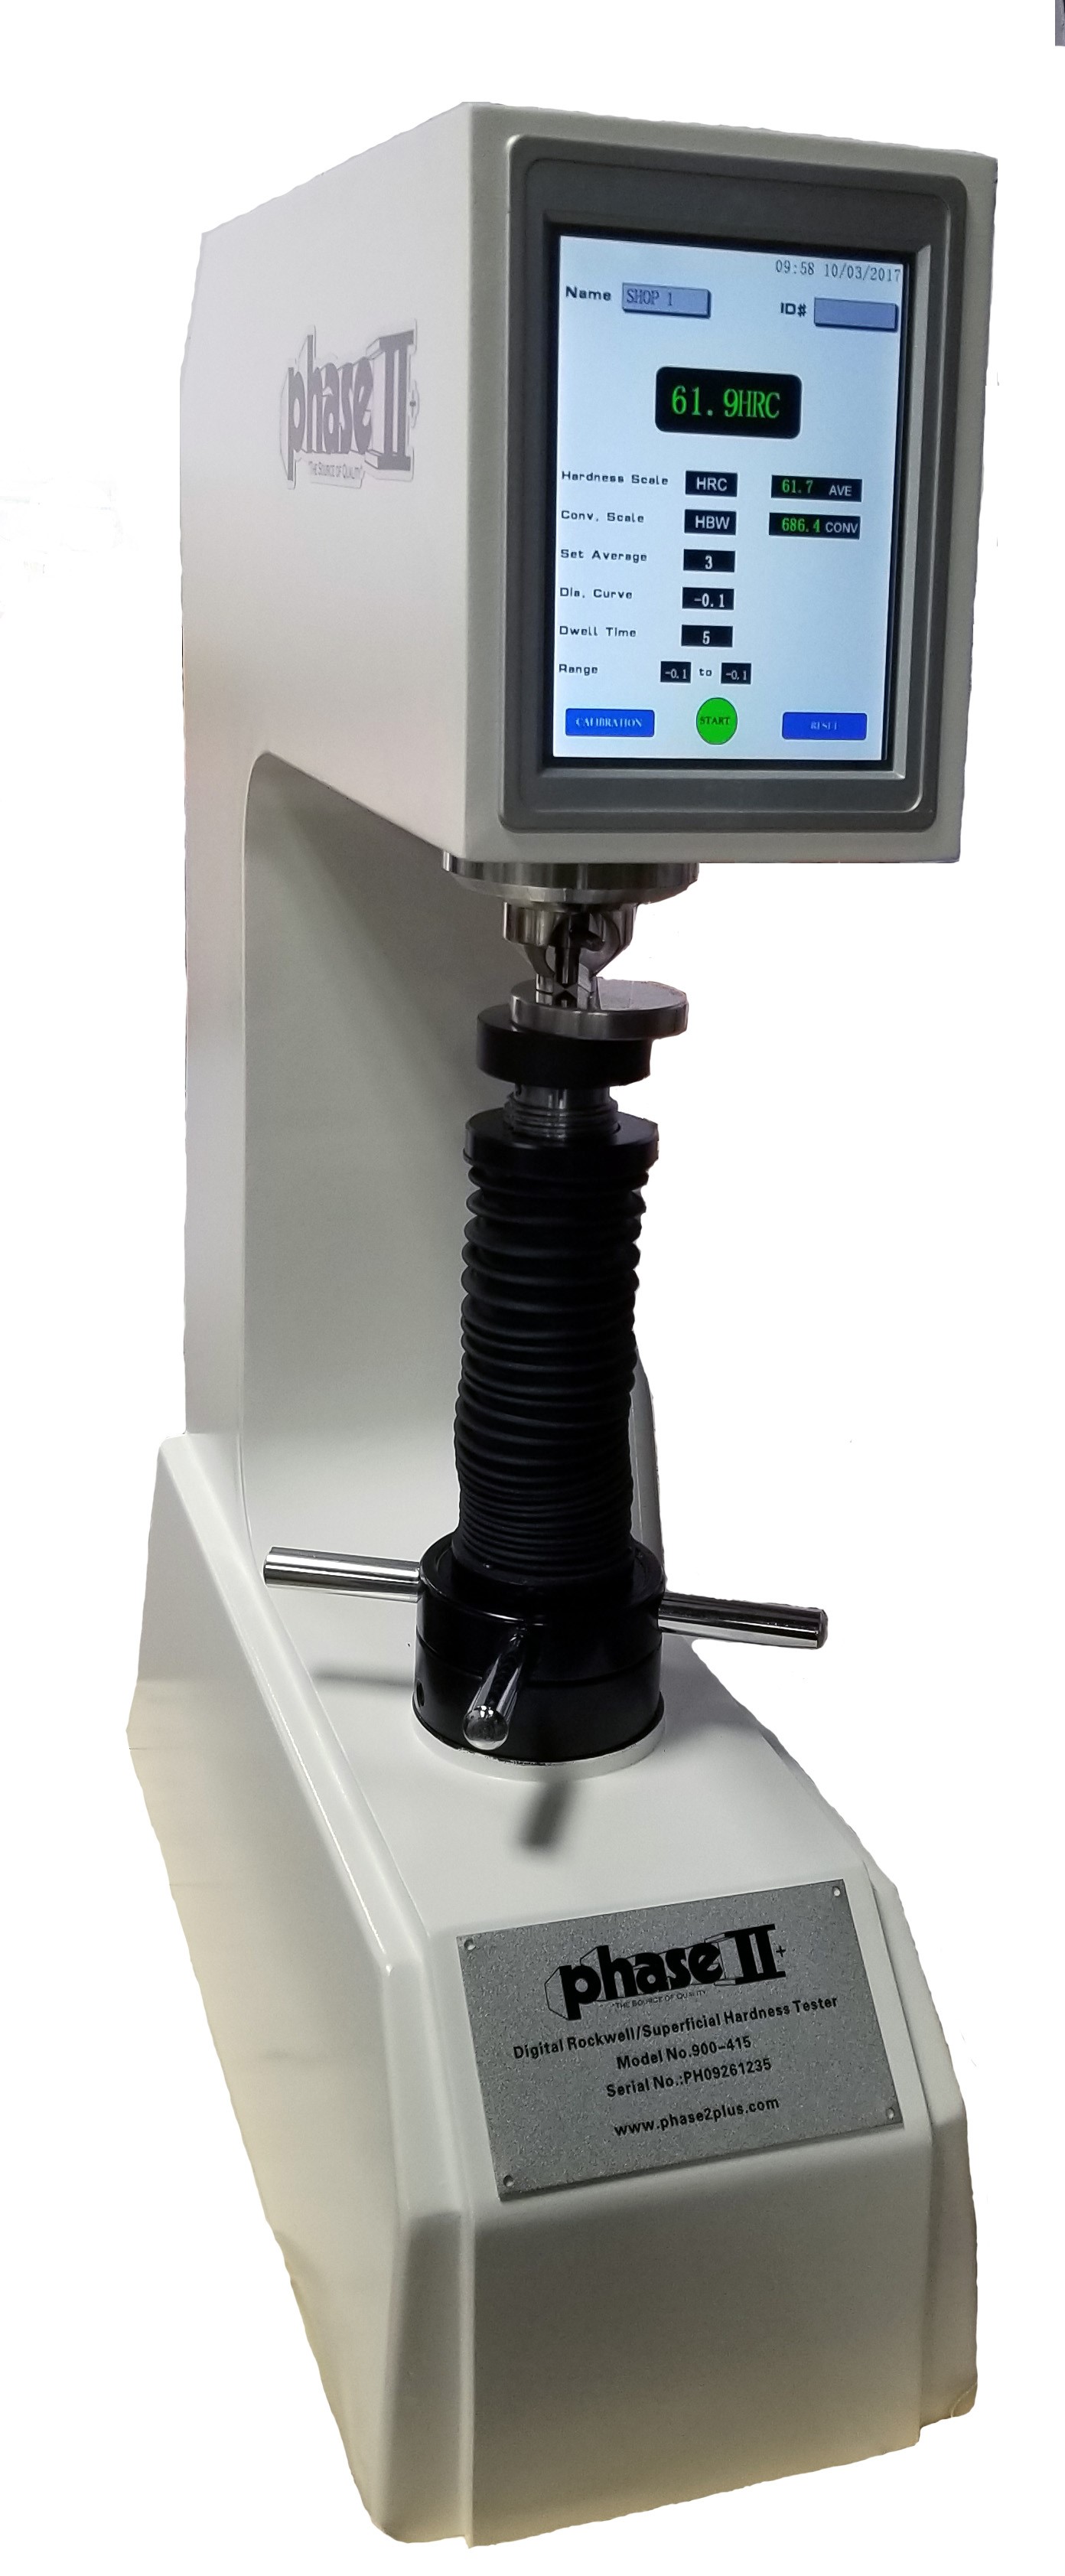 Digital TWIN Rockwell/Superficial Rockwell Hardness Tester(900-440)